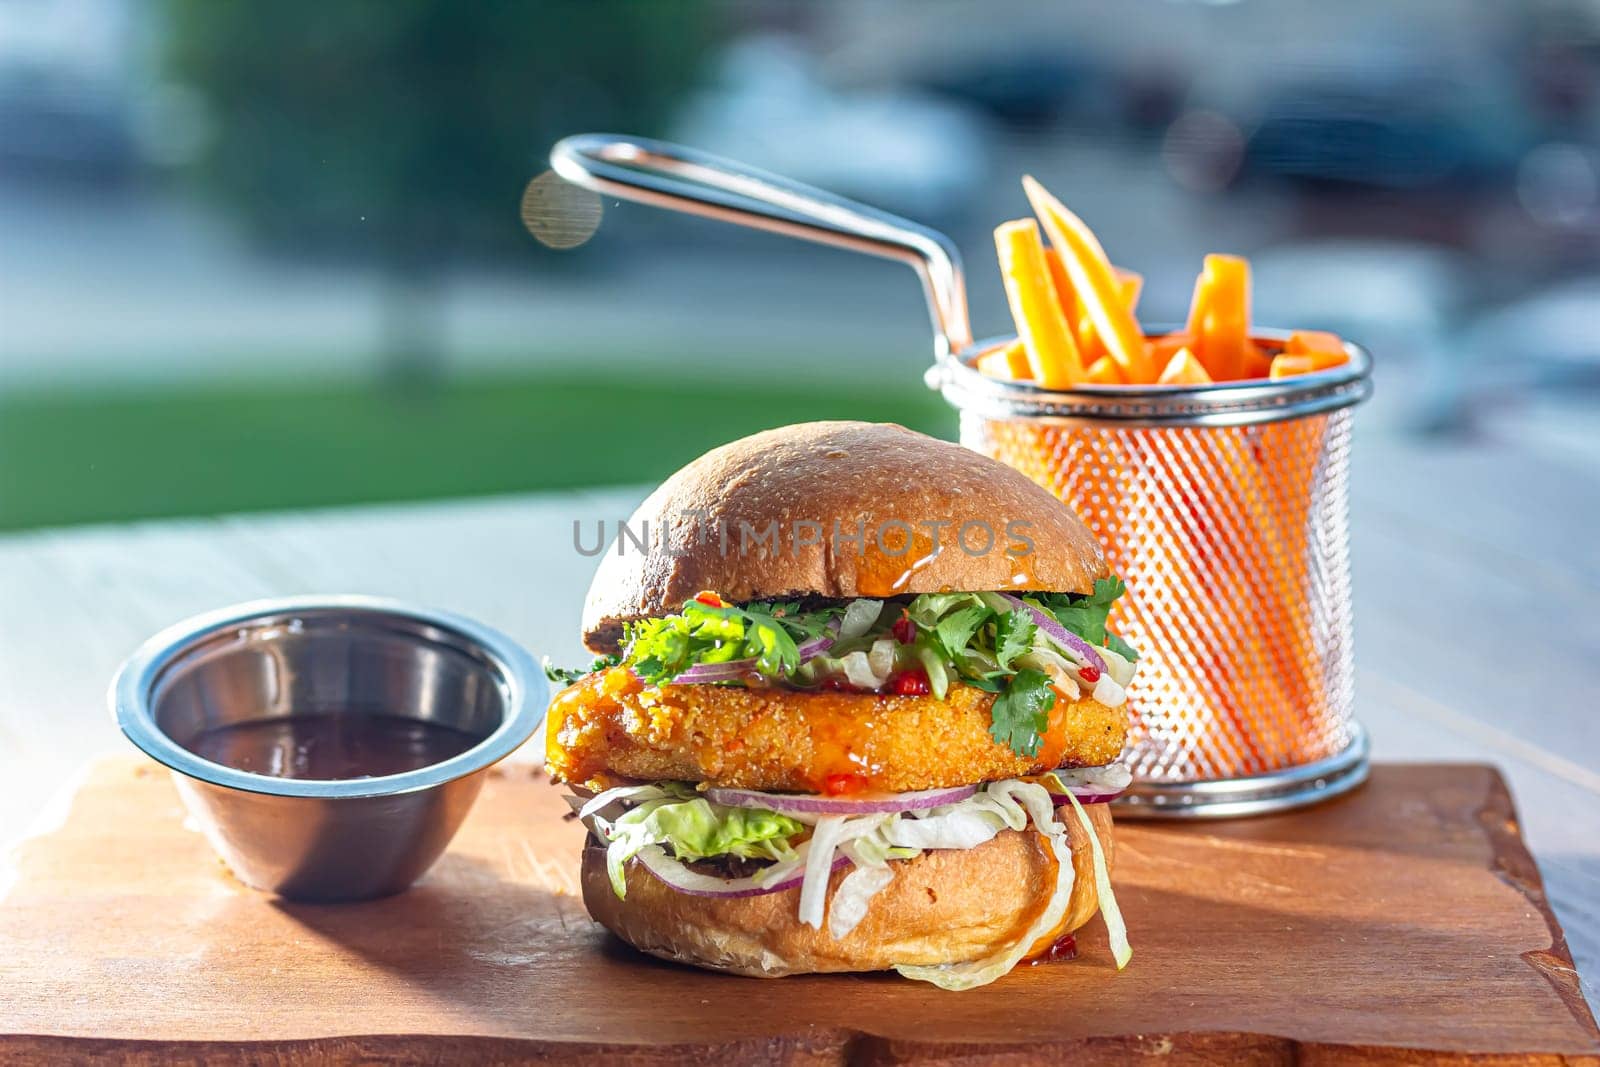 Hamburger with chicken cutlet, fresh tomatoes, red onion, lettuce and tomato sauce. Next to the burger is a metal mold with fries, a metal mold with chili sauce. Burger, fries and sauce are on a brown by Milanchikov